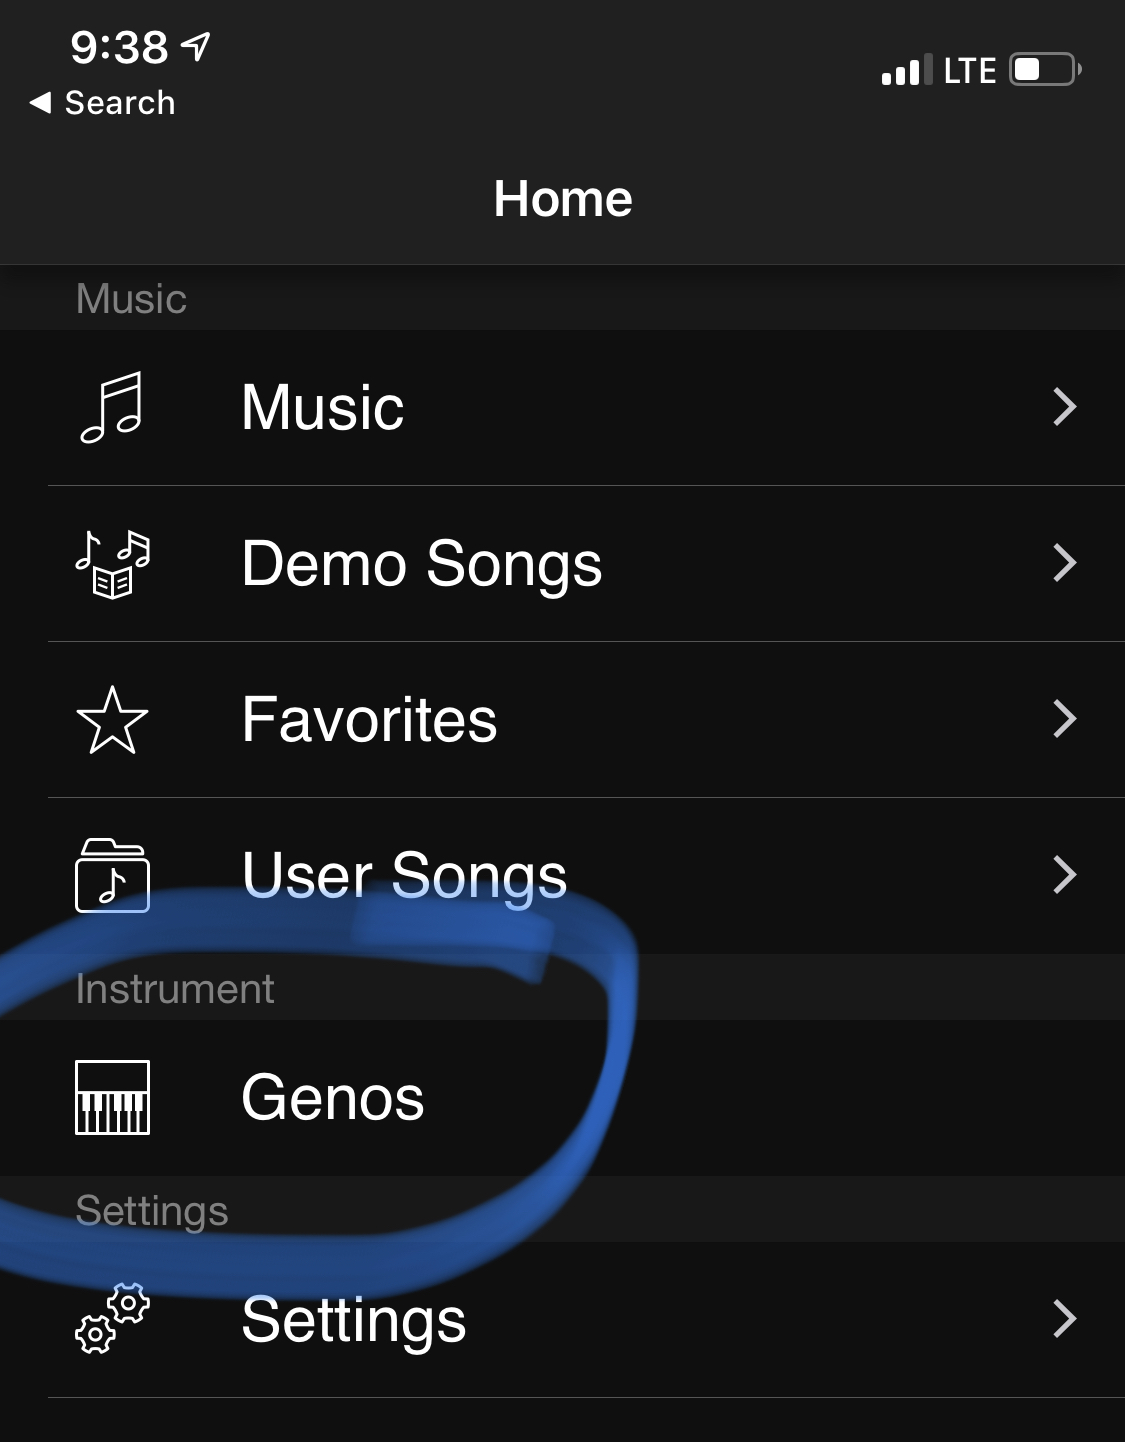 An image displaying the "Genos" option within the Chord Tracker app.